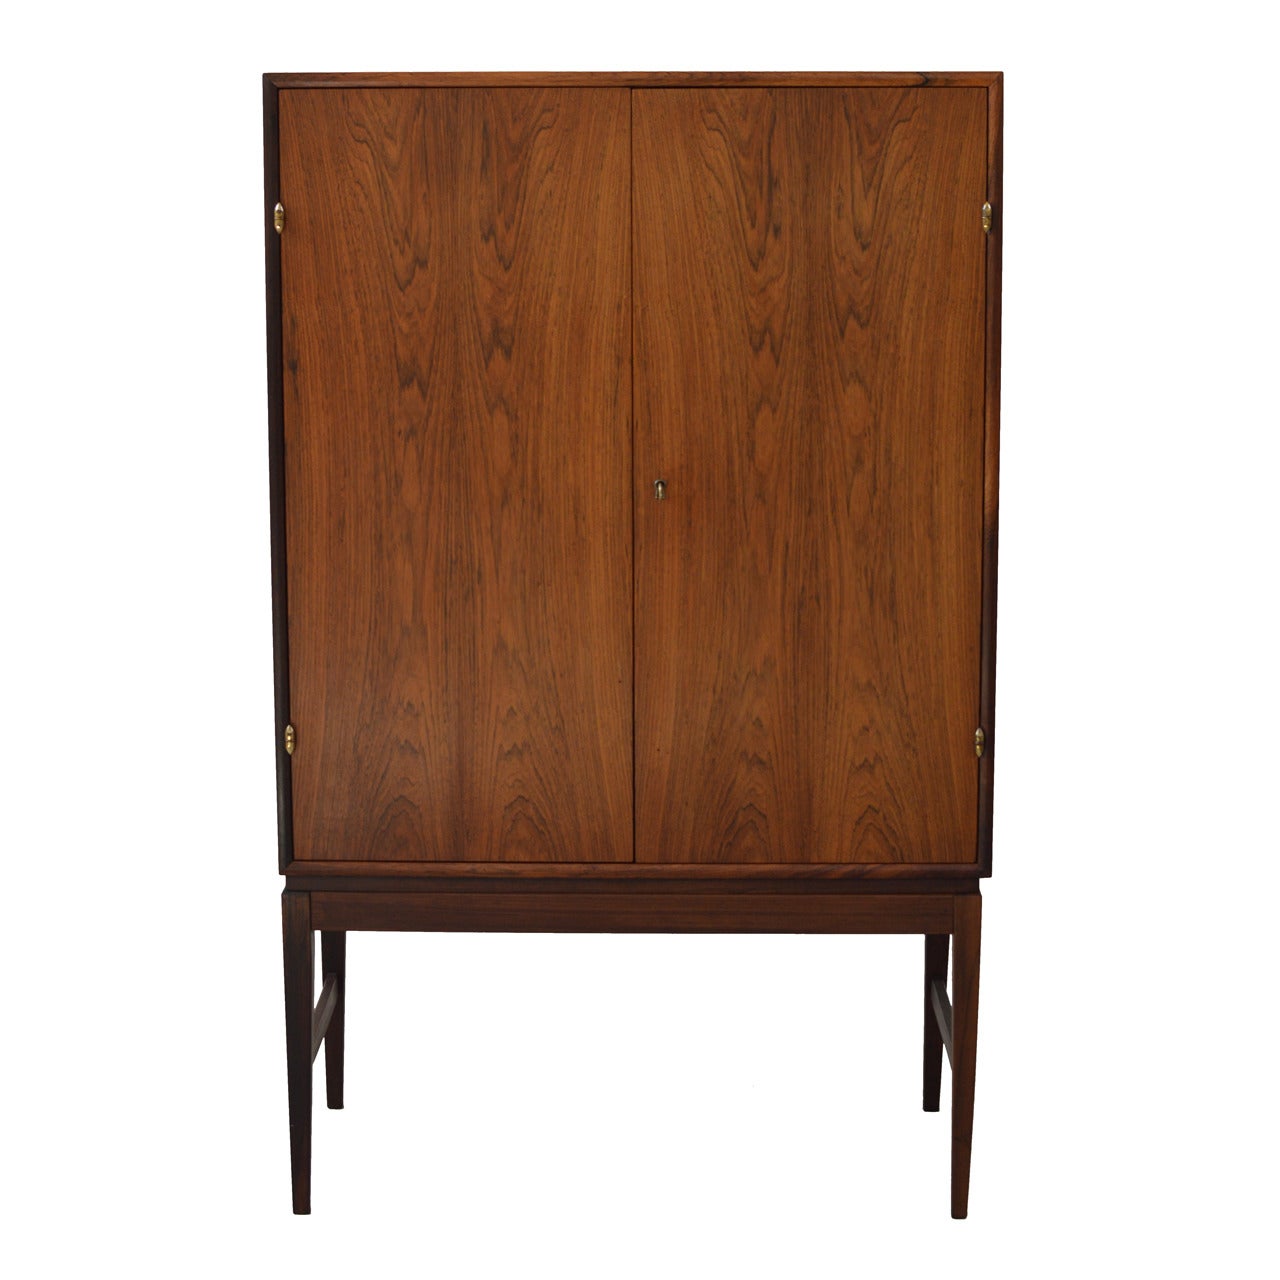 Refined Danish Rosewood Cocktail Cabinet with Brass Hinges